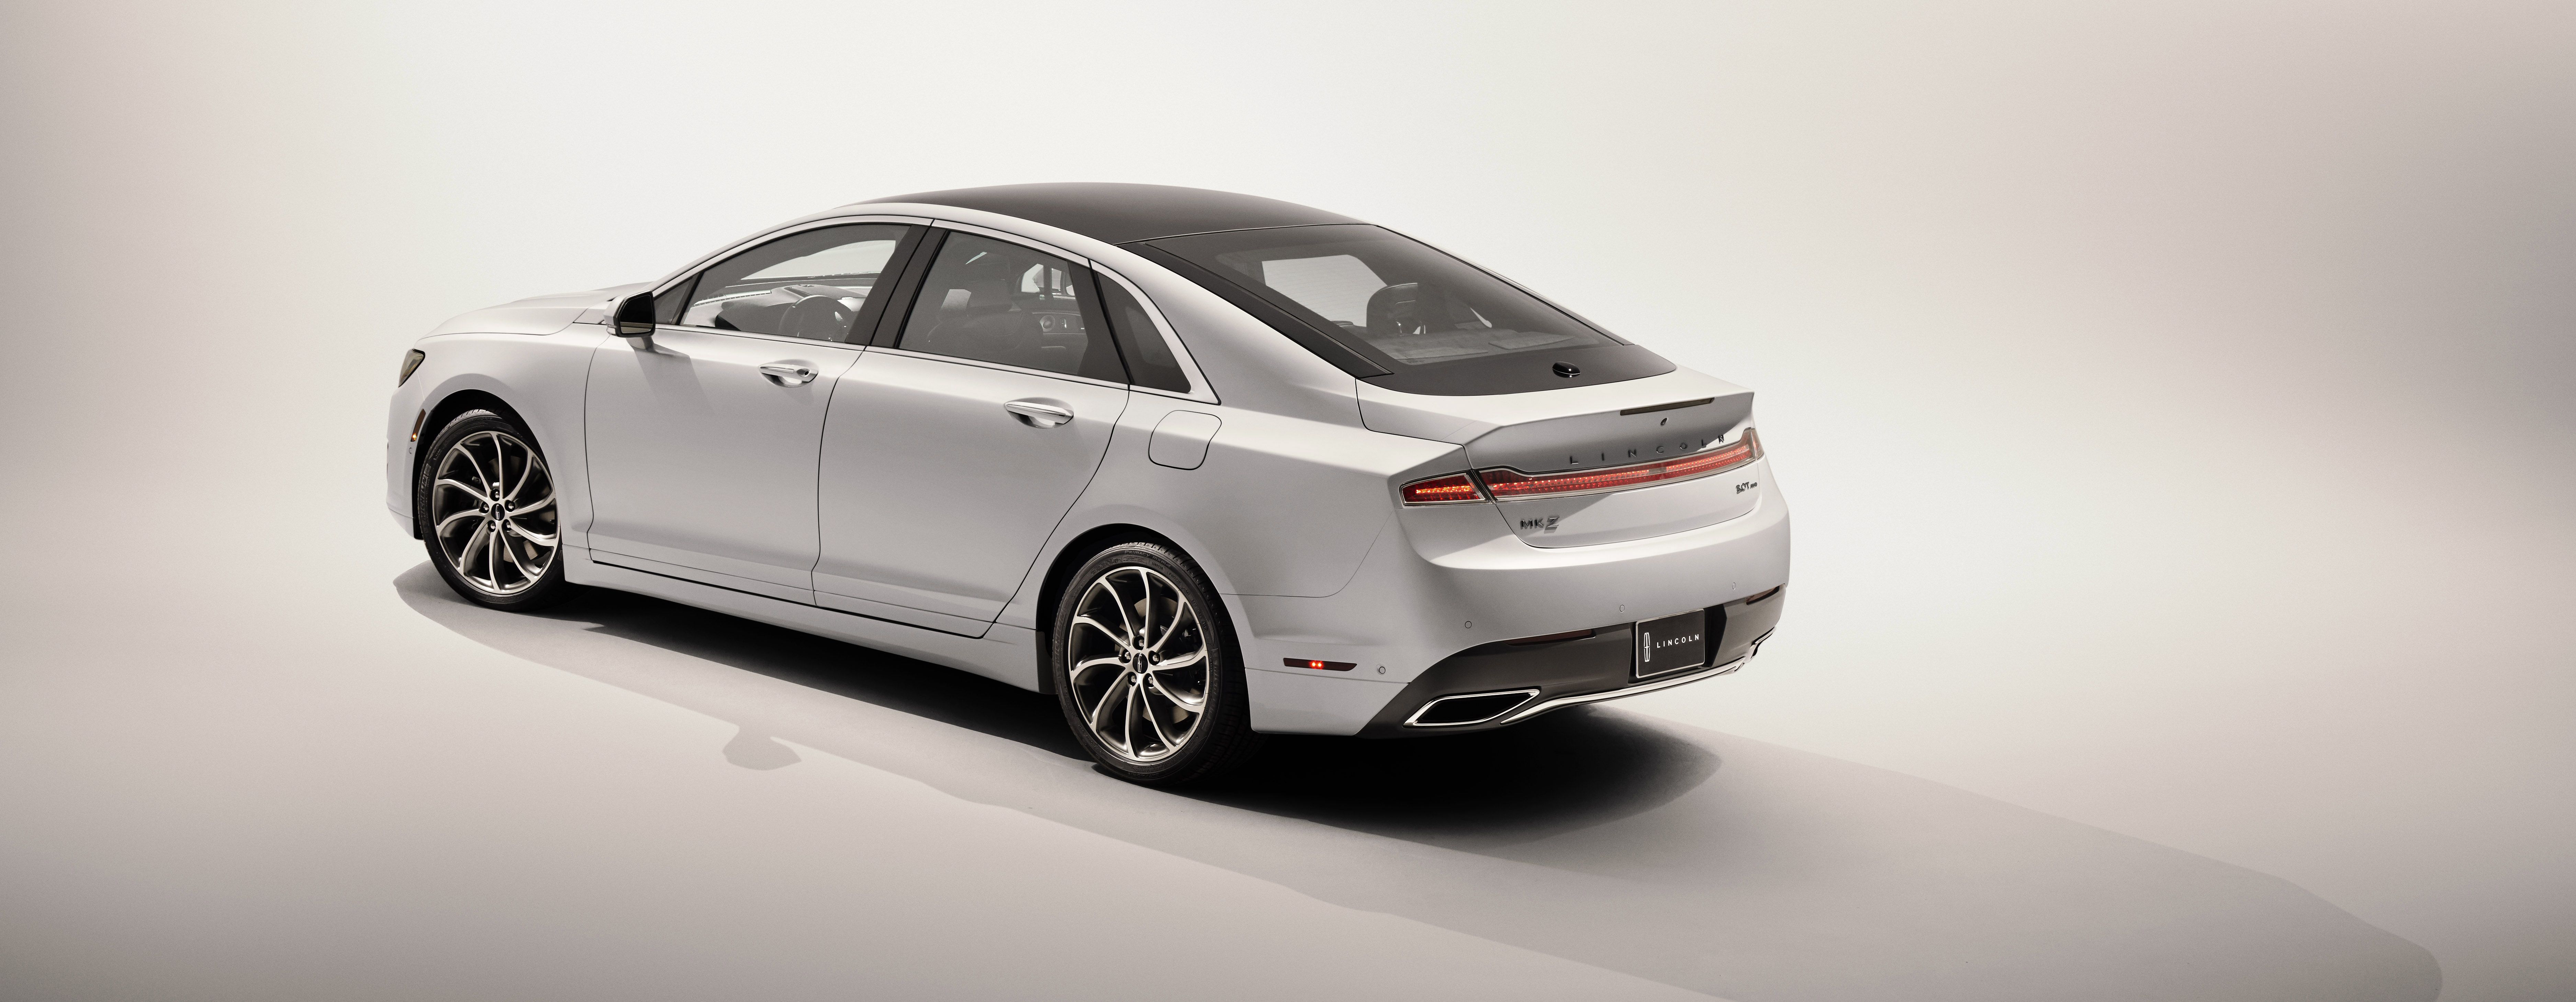 2018 Lincoln MKZ Review, Pricing, and Specs